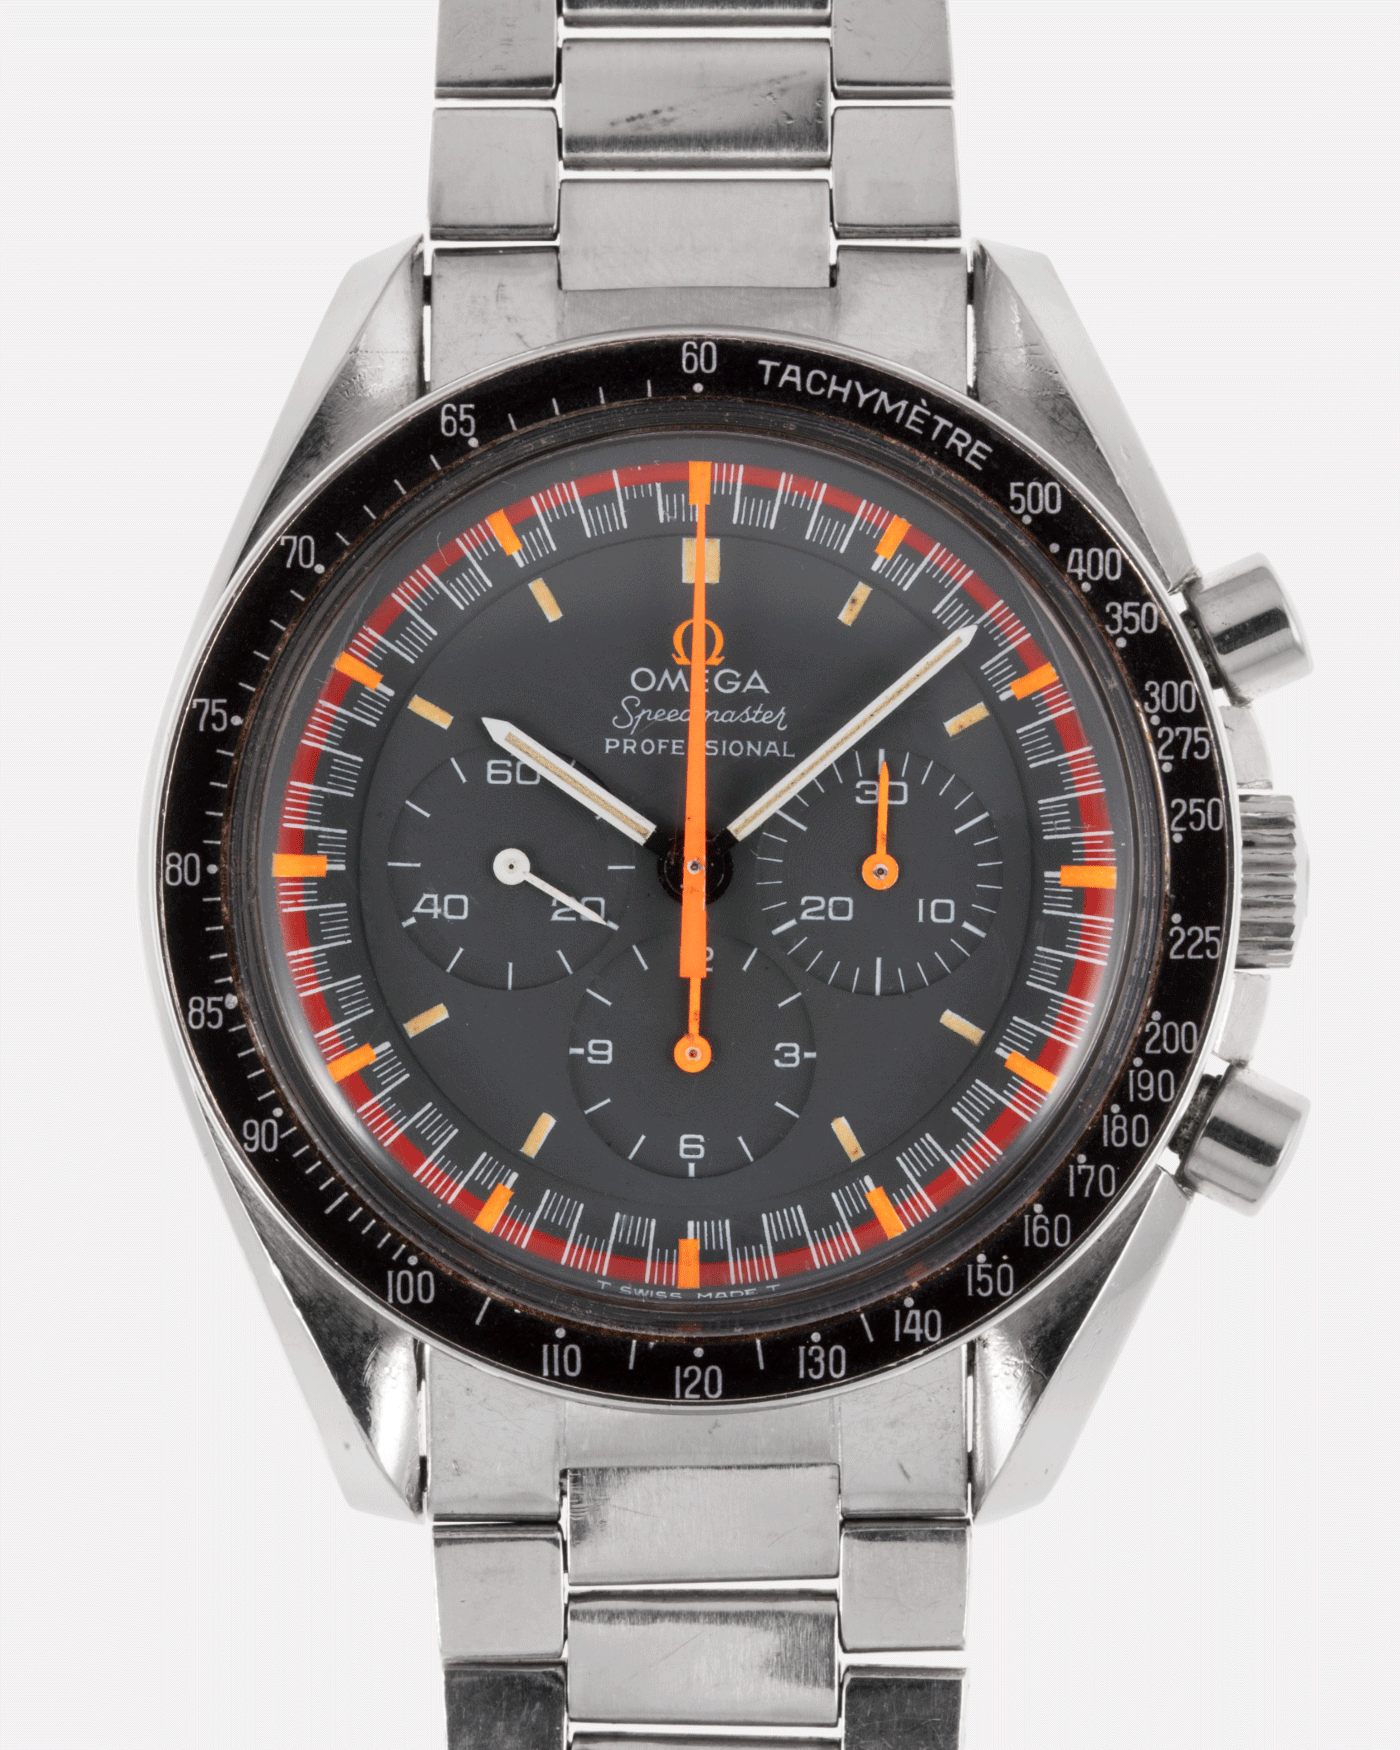 Brand: Omega Year: June 1970 Model: Speedmaster Professional Racing Dial Reference Number: 145.022 Serial Number: 29XXXXXX Material: Stainless Steel Movement: Cal. 861 Case Diameter: 42mm Lug Width: 20mm Bracelet/Strap: Omega 1039 Flat Link Bracelet Dated 2.70 with 516 End Links